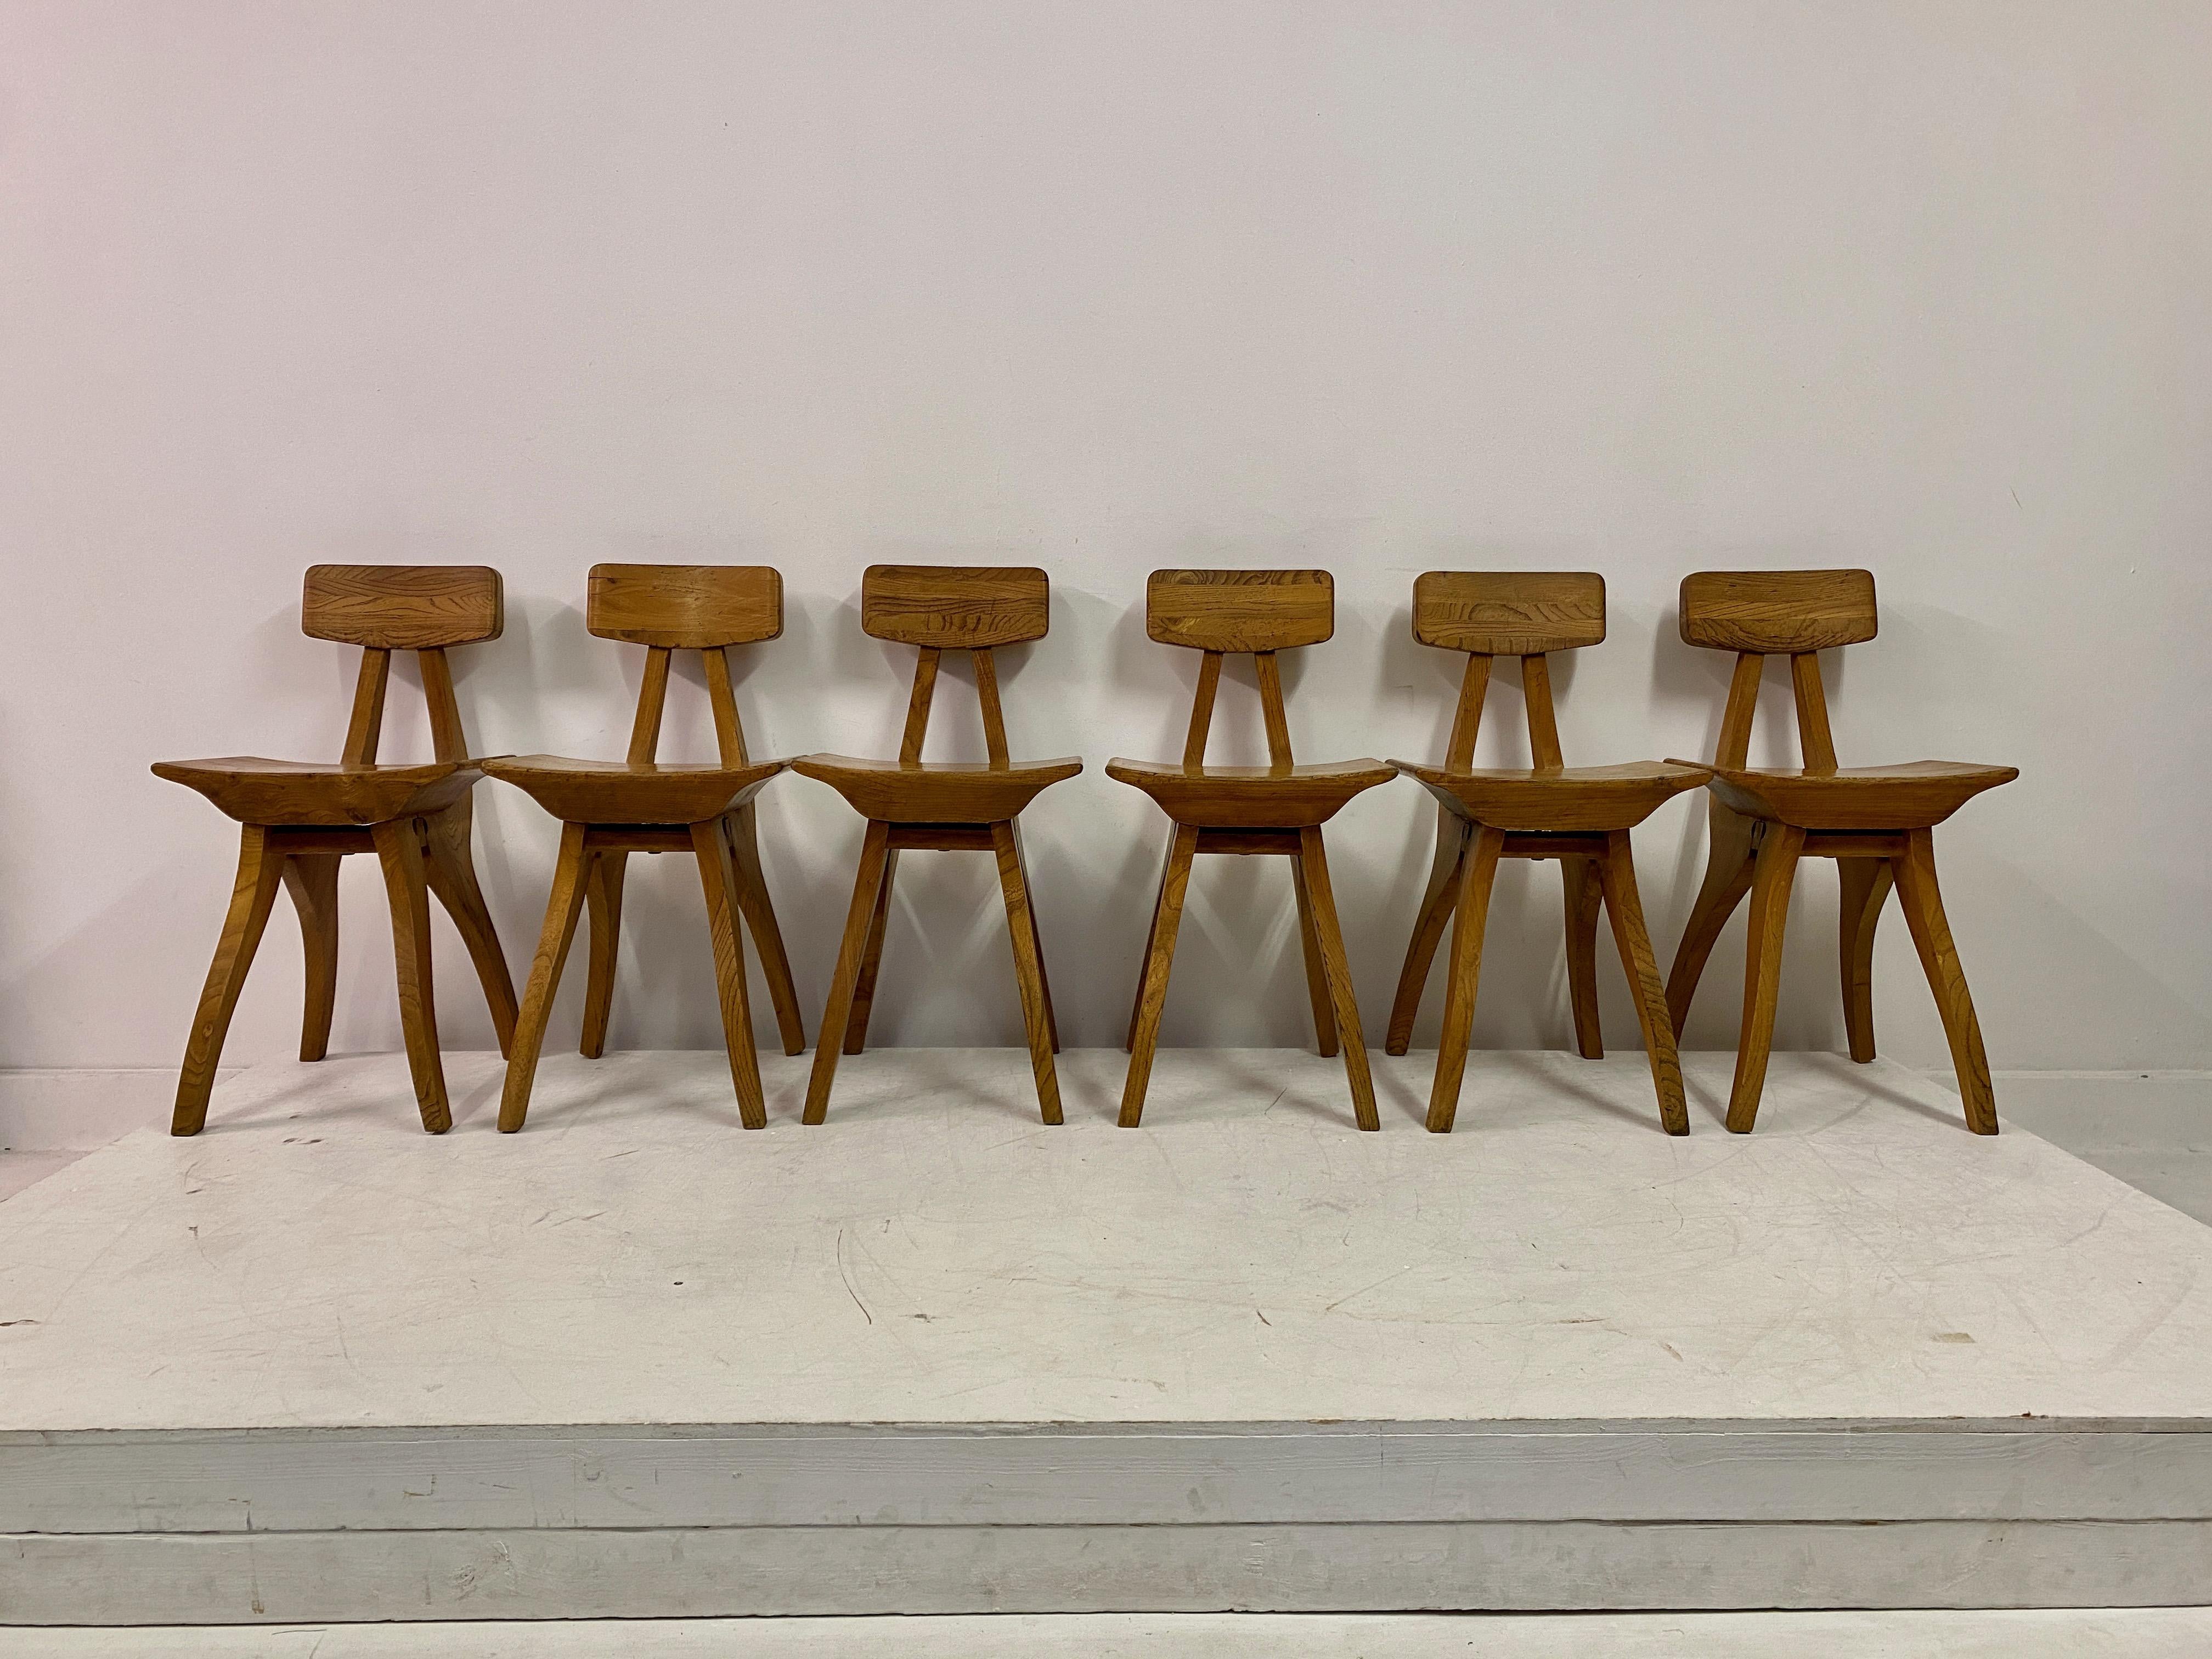 Set of six chairs

Elm

Brutalist

Unusual form and construction

Mid century

Seat height 47cm